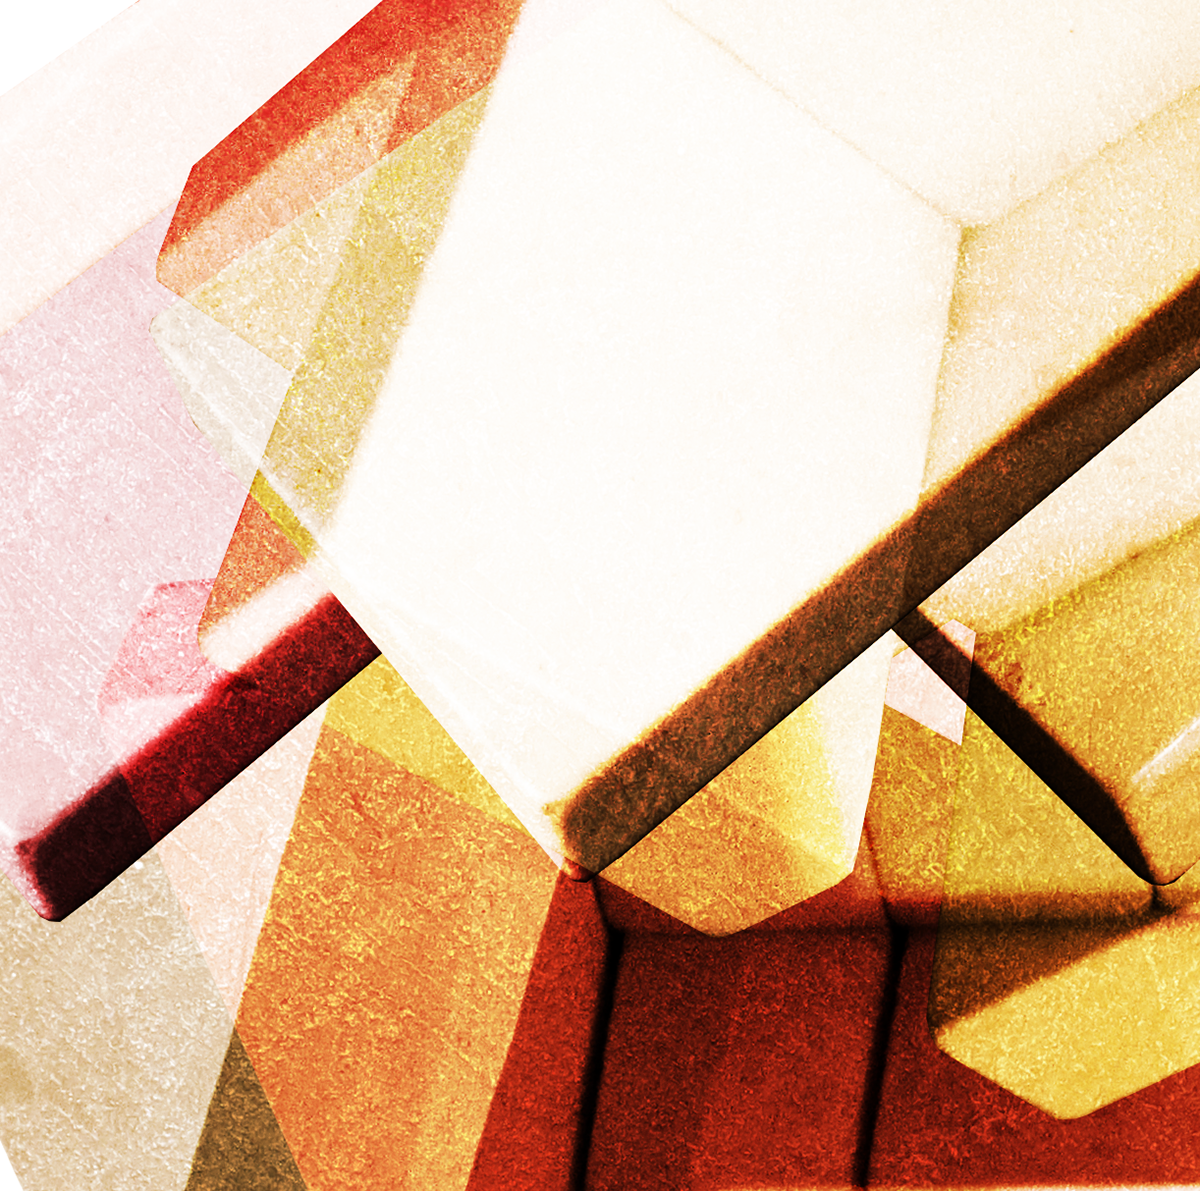 blocks building toys cubes structure abstract structures Brutalism Cubsim constructivism